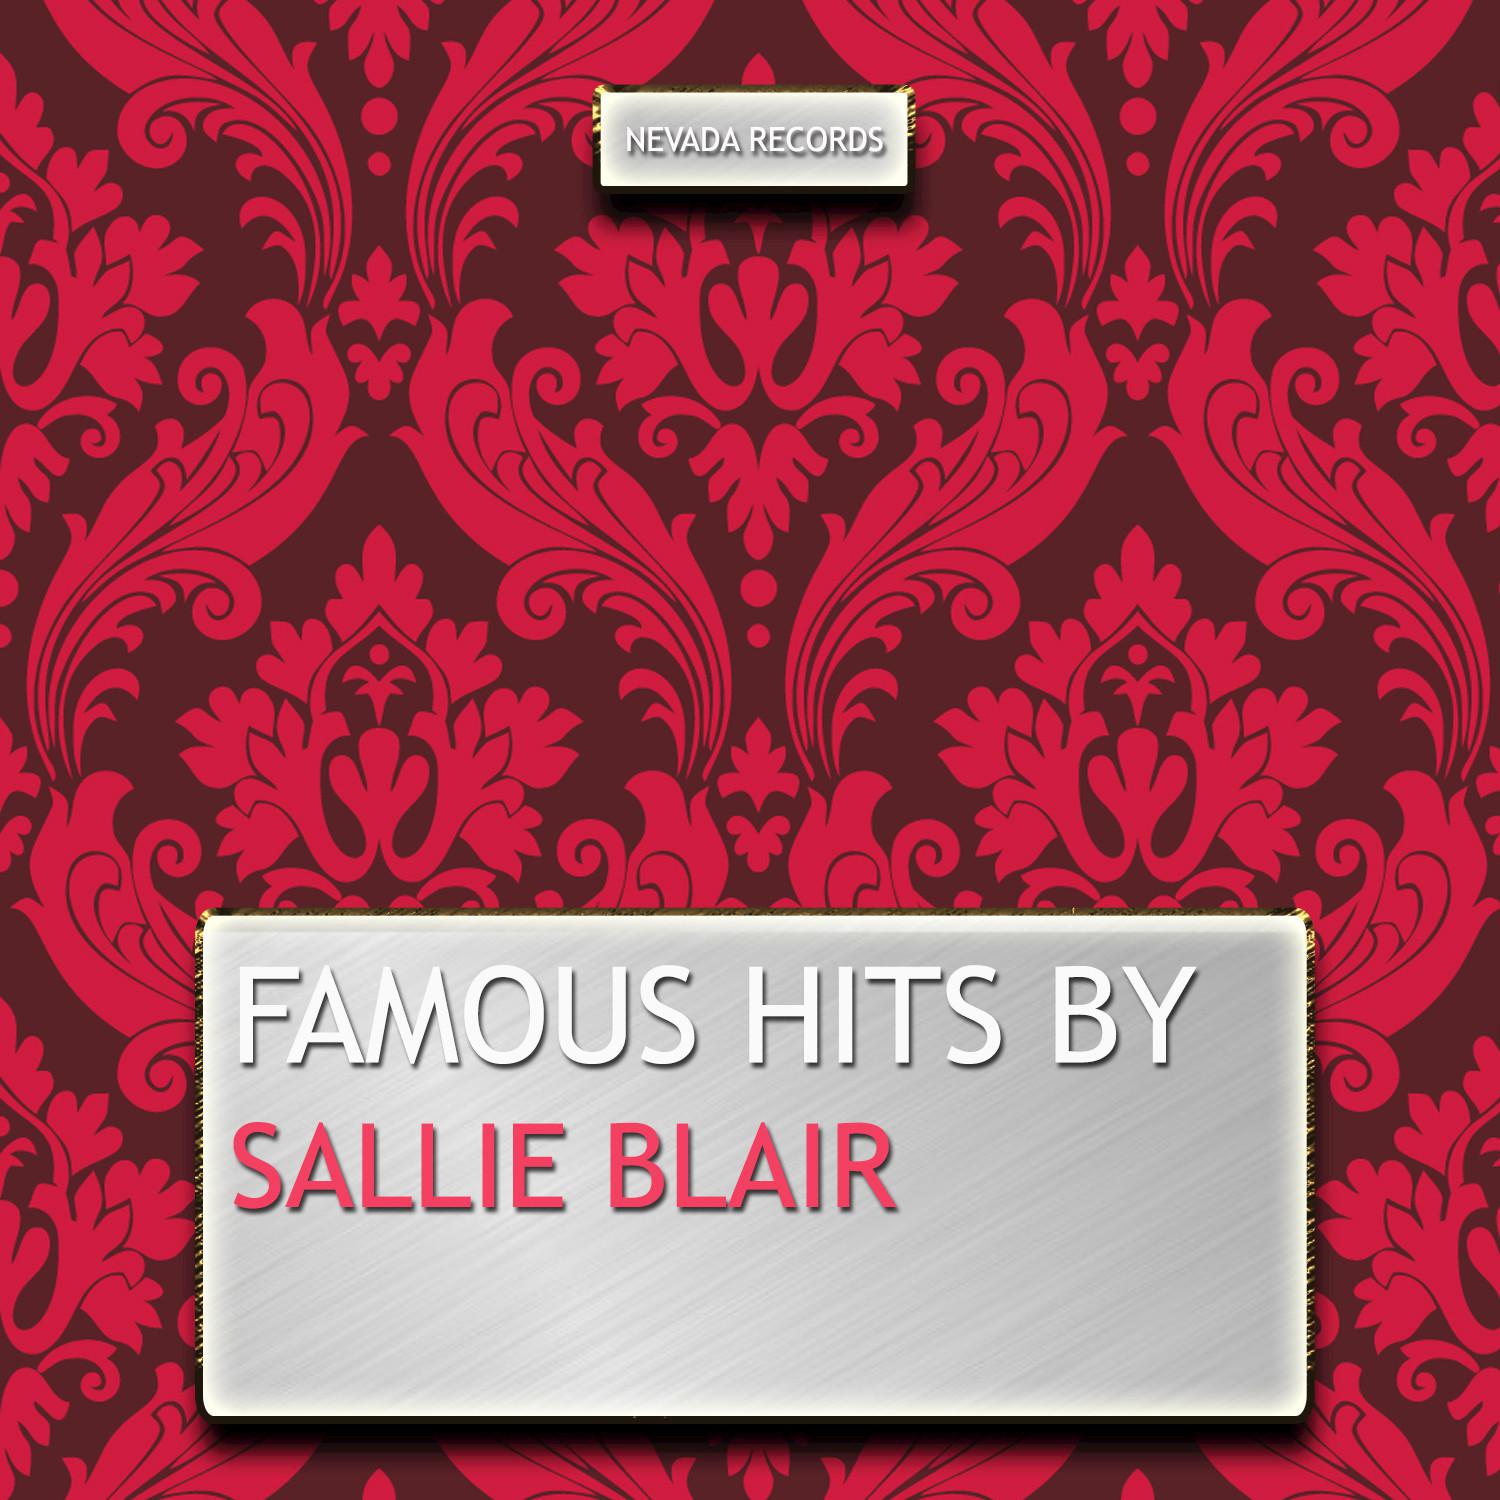 Famous Hits By Sallie Blair